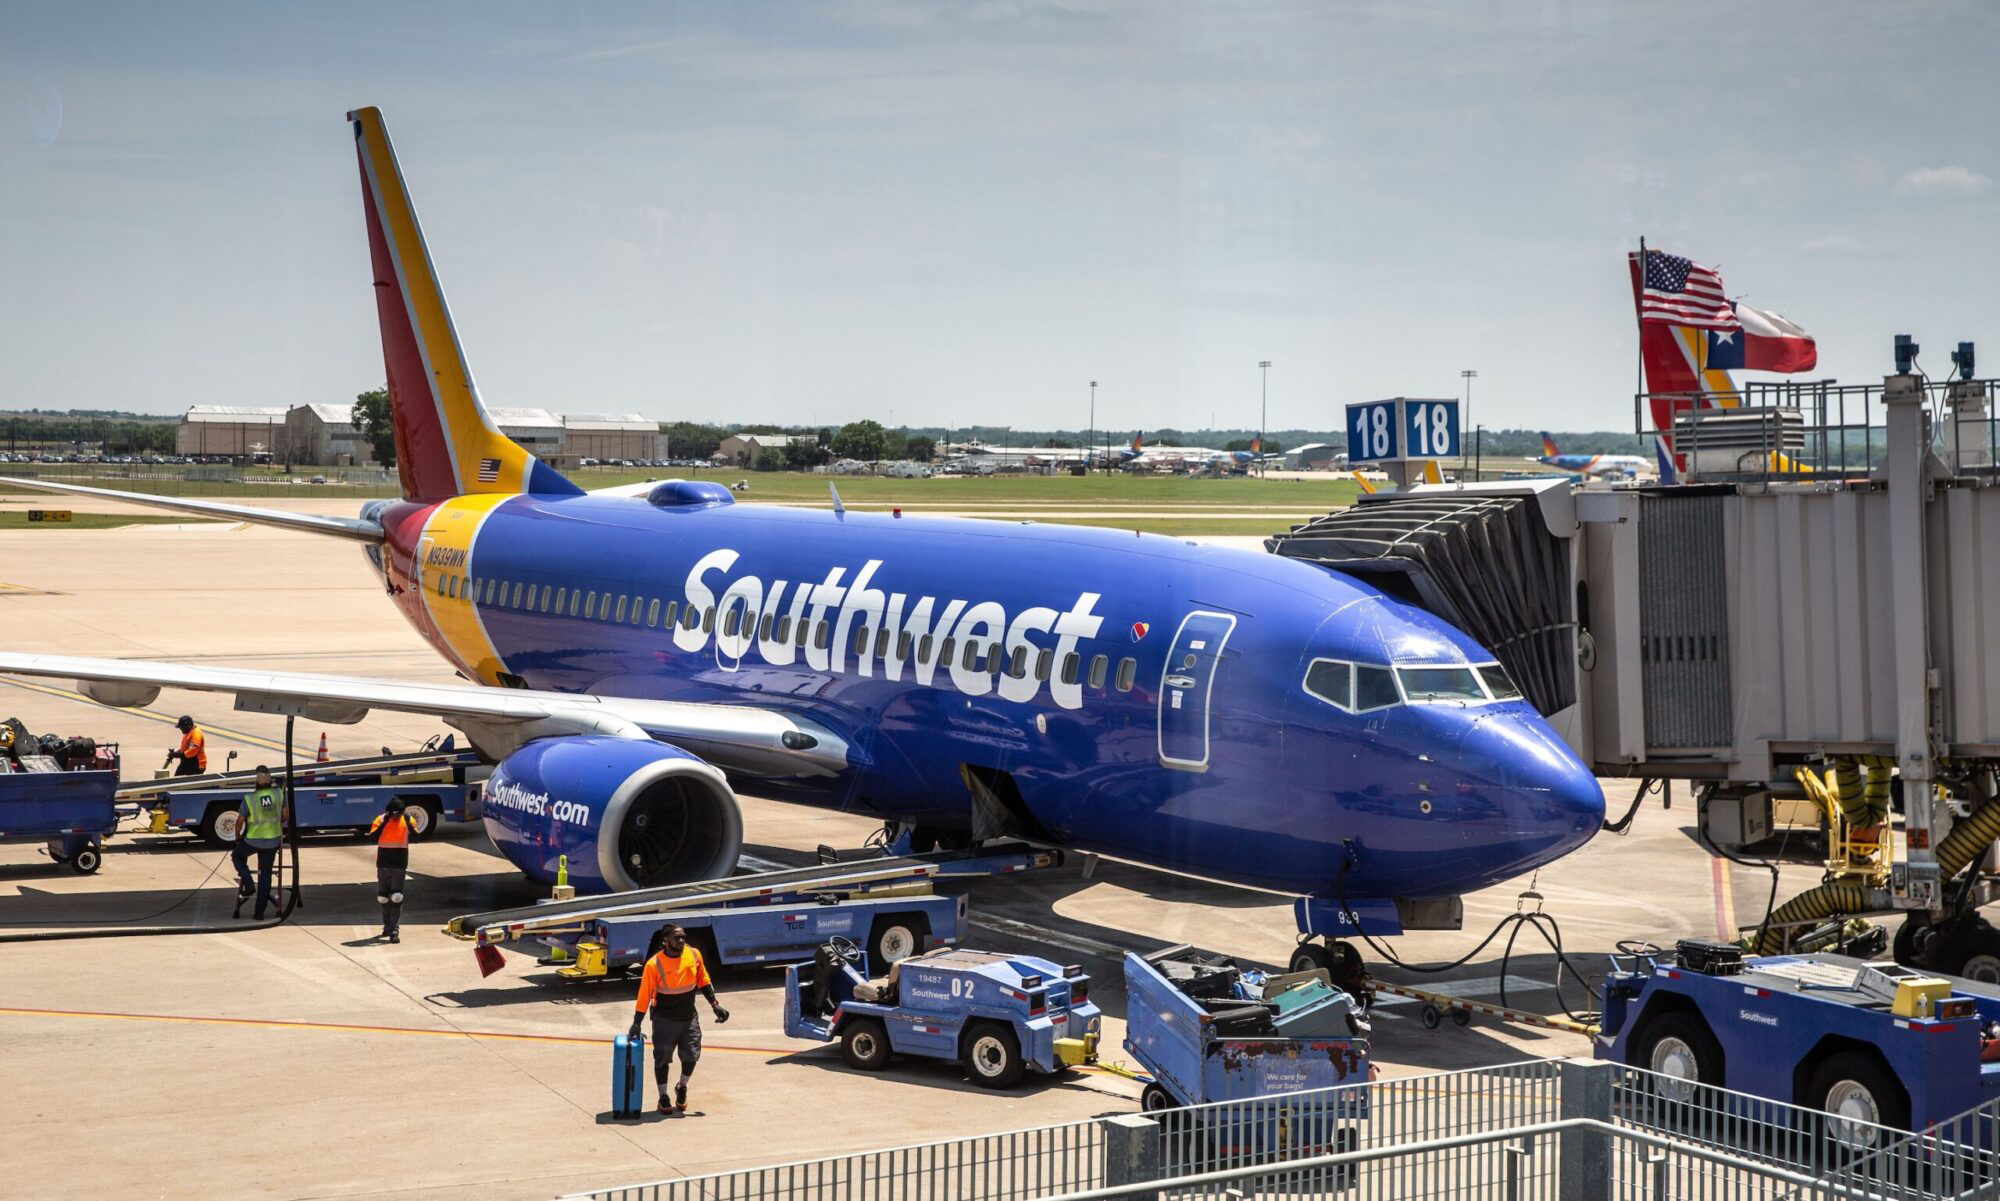 Southwest passenger allegedly escorted off plane for petting new puppy